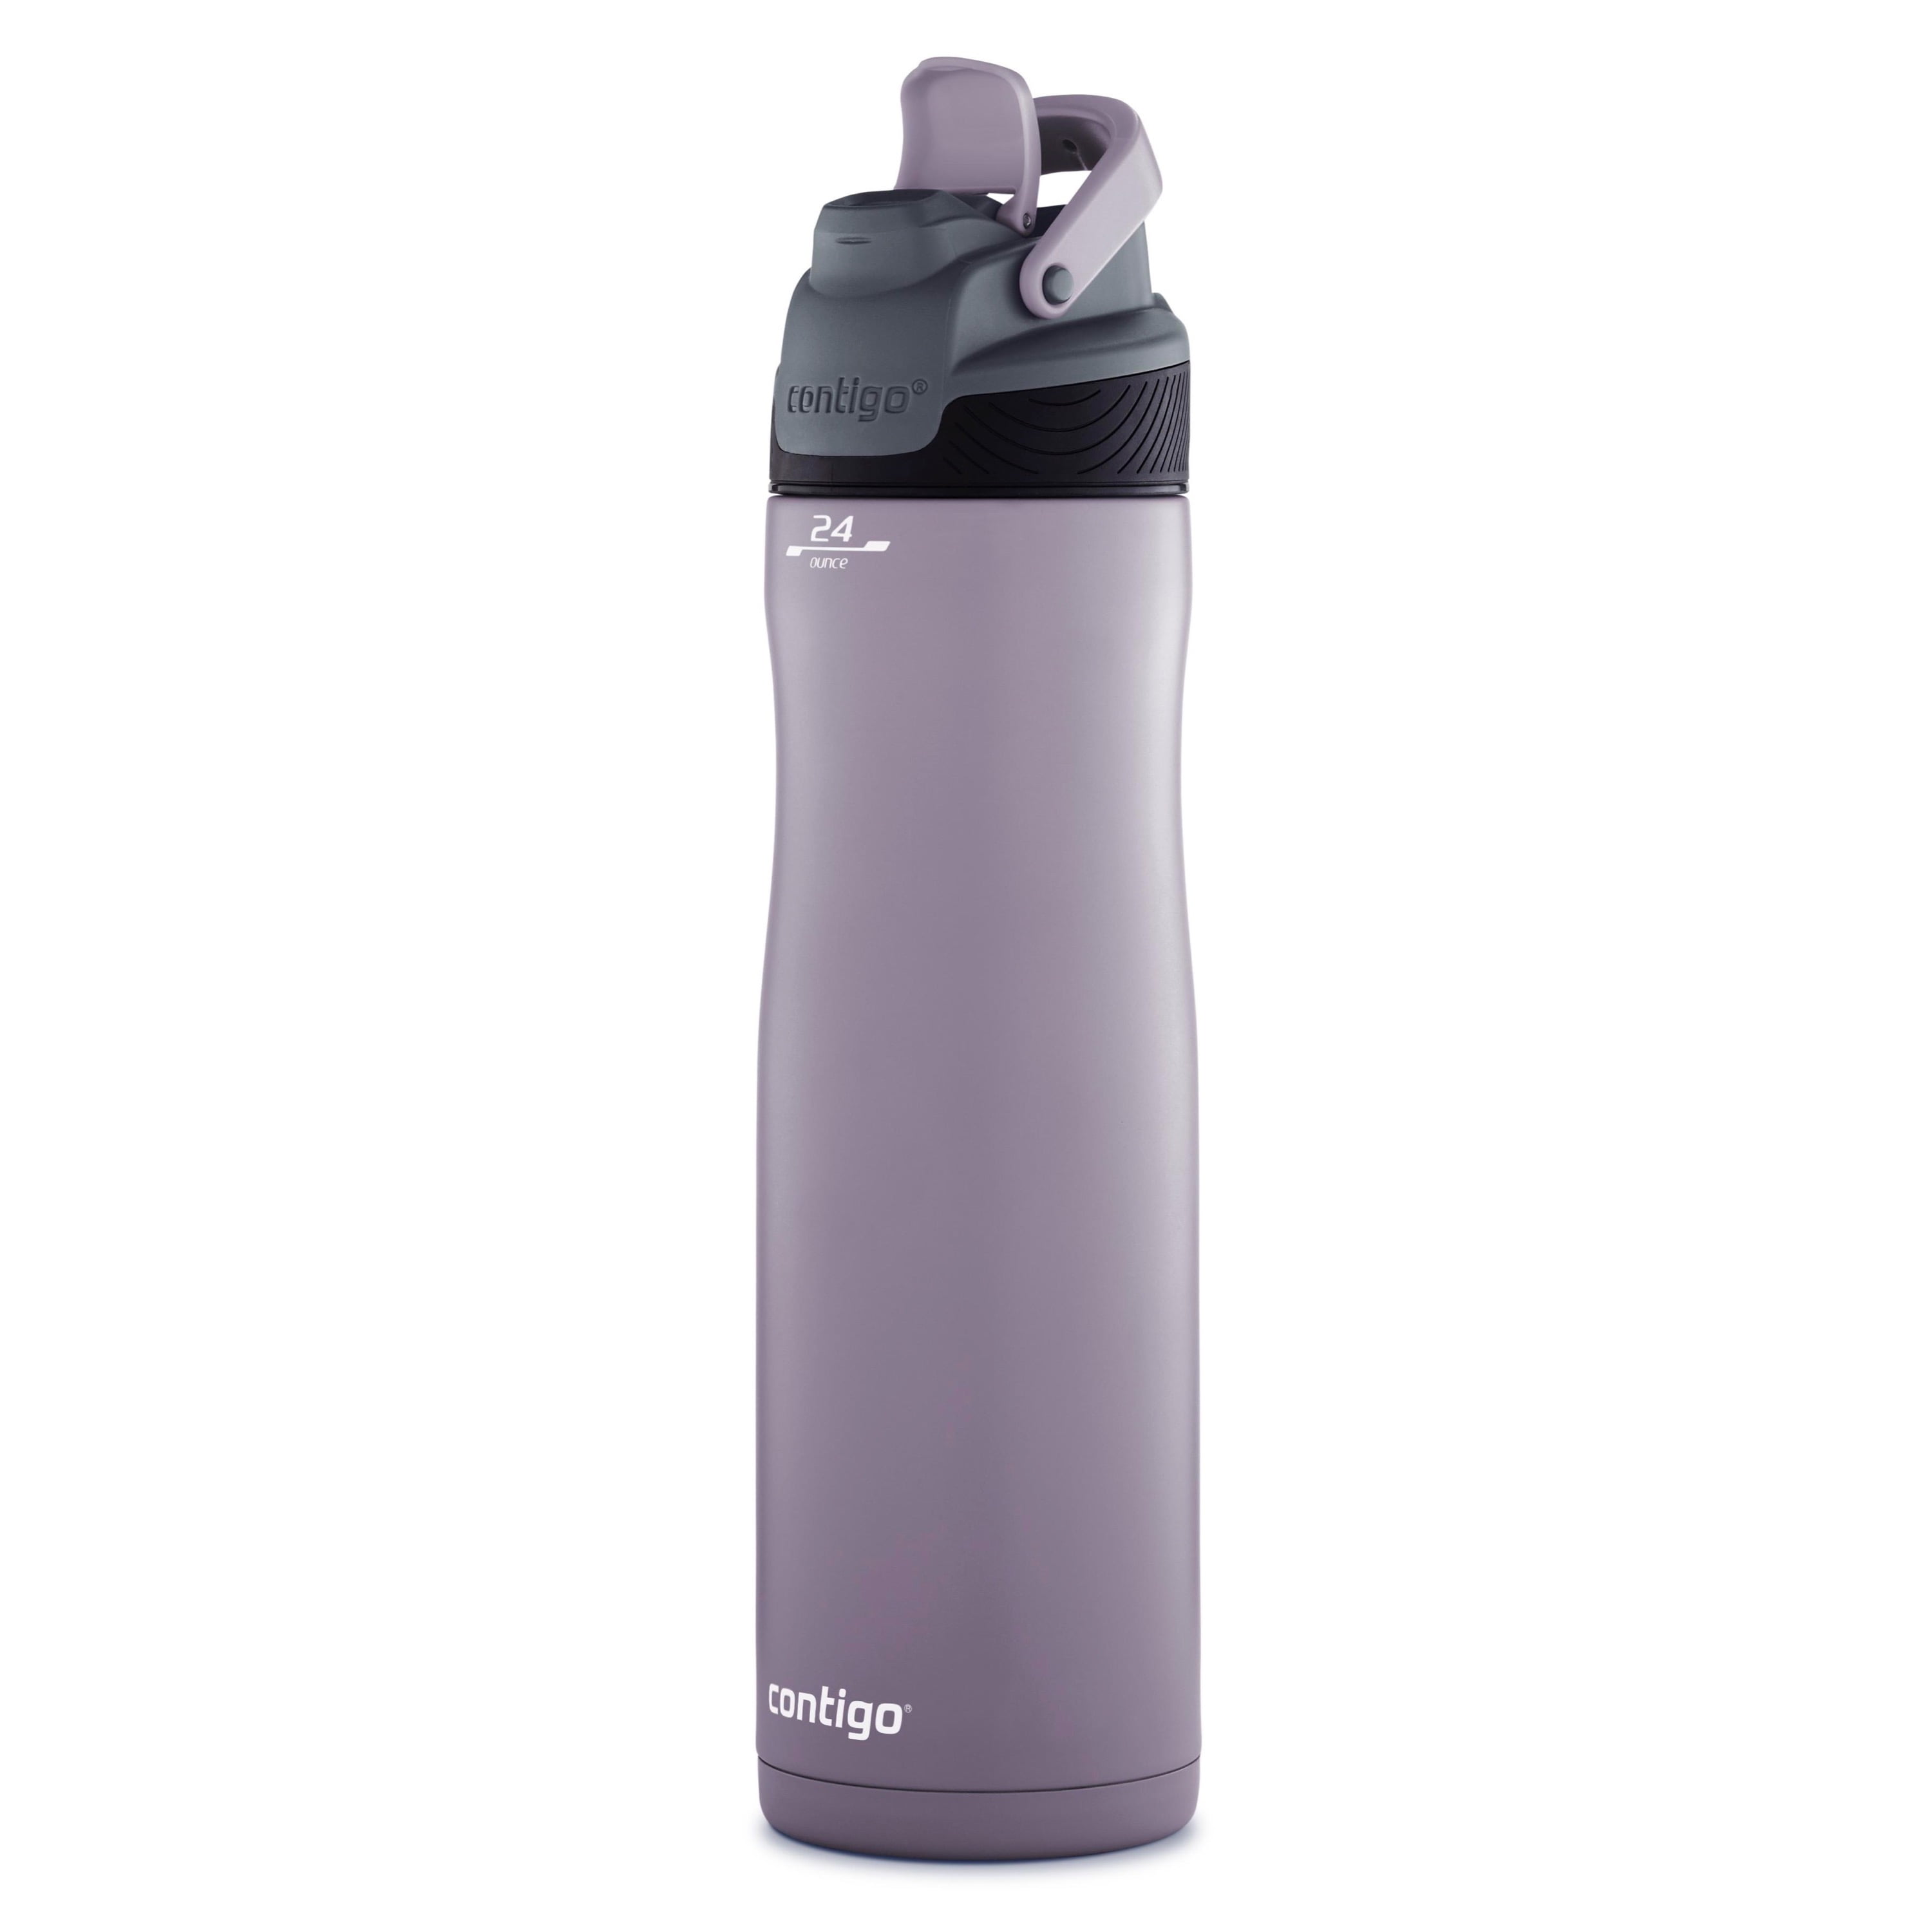 Contigo AUTOSEAL 24-oz Chill Stainless Steel Water Bottle Just